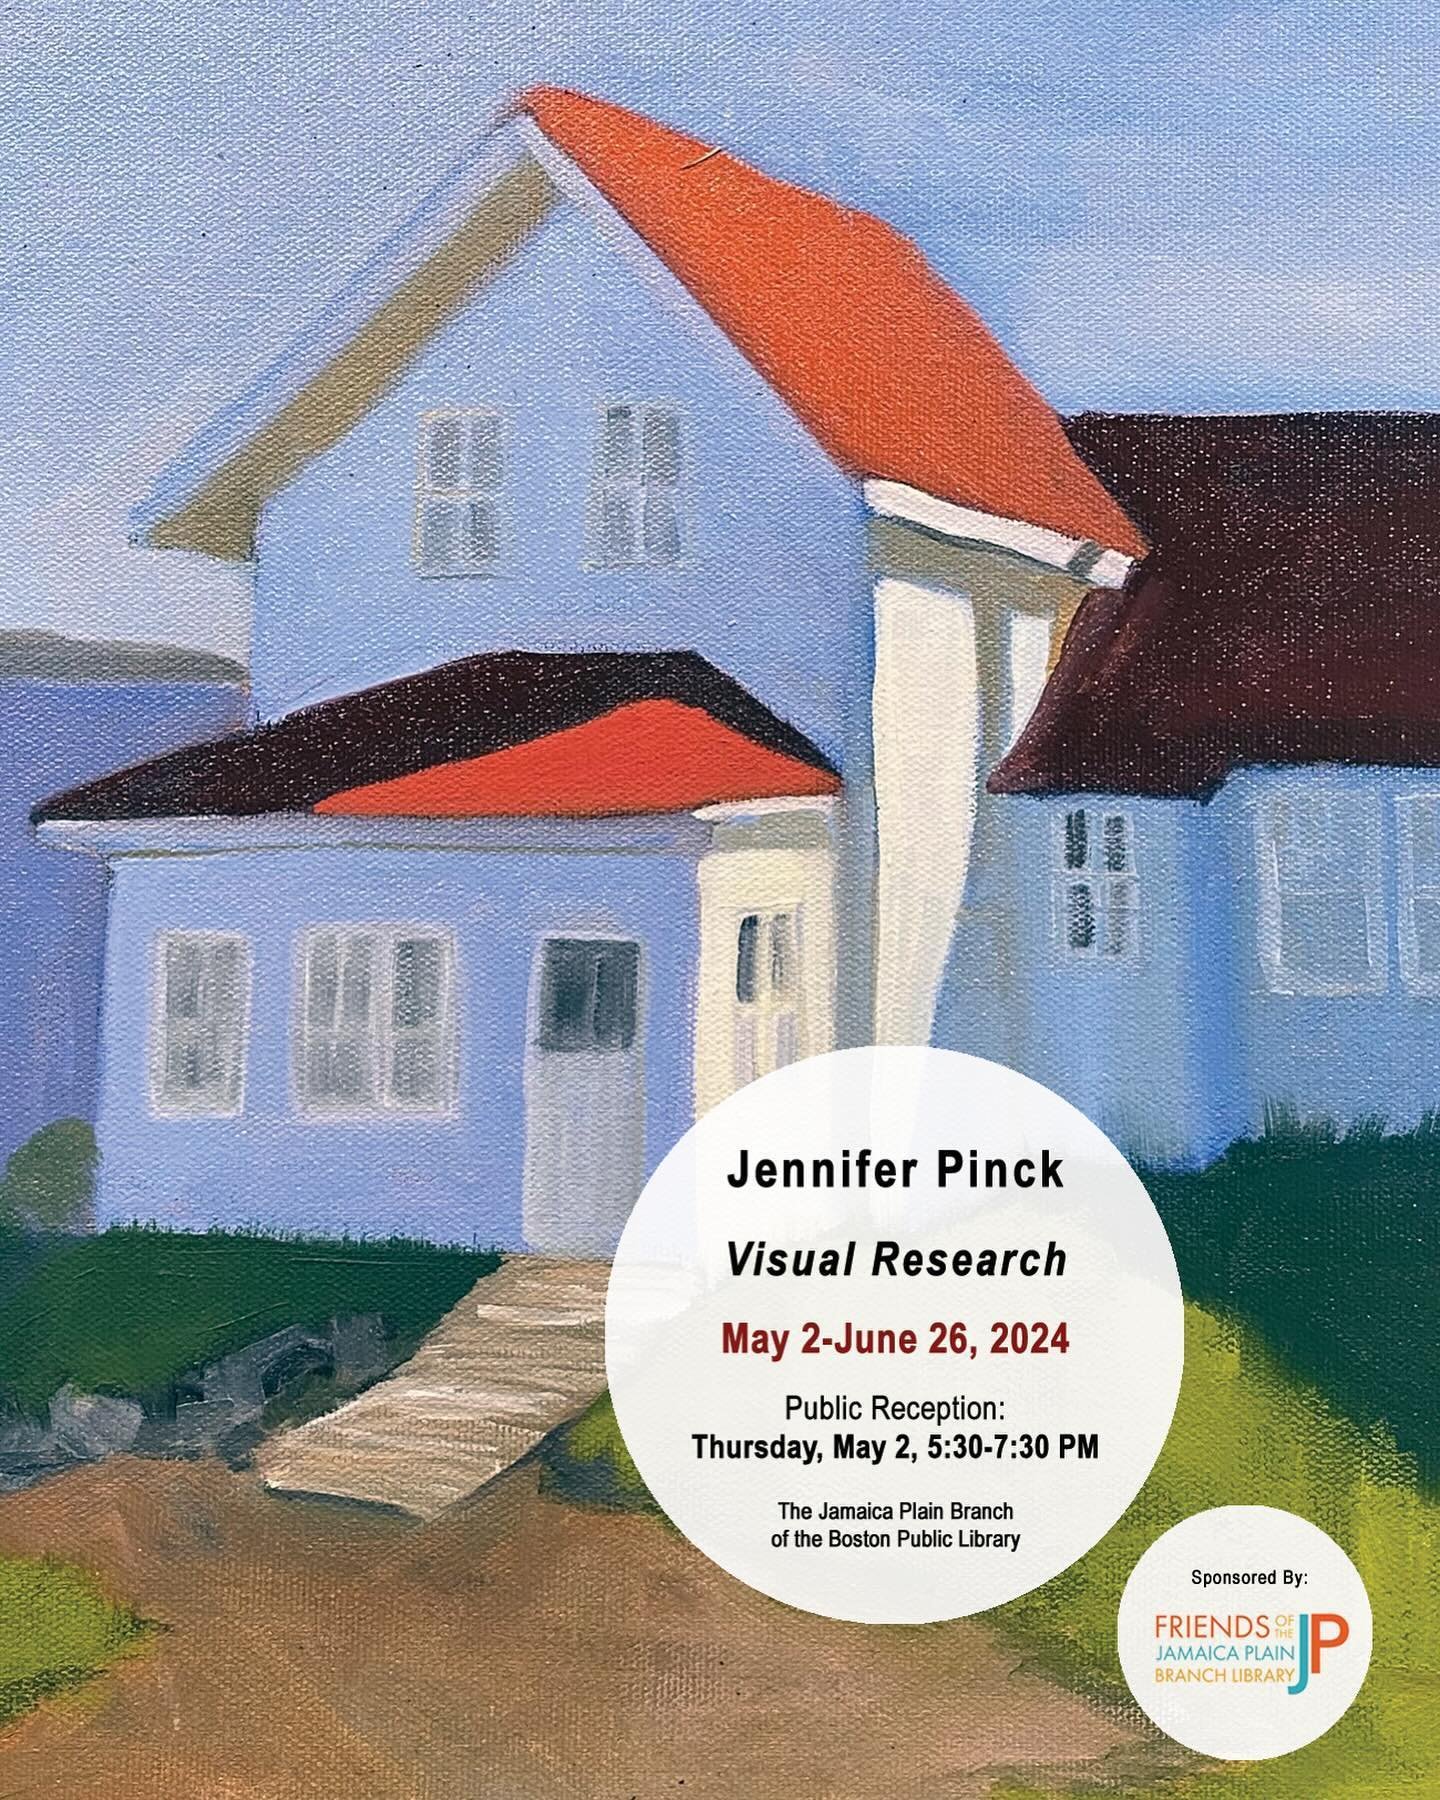 New art alert! Join us as we feature @jenpinck and her latest exhibit, &quot;Visual Research,&rdquo; highlighting Pinck's multifaceted experiences and her profound passion for painting. Reception @bpljamaicaplain May 2 from 5:30-7:30 PM #jamaicaplain